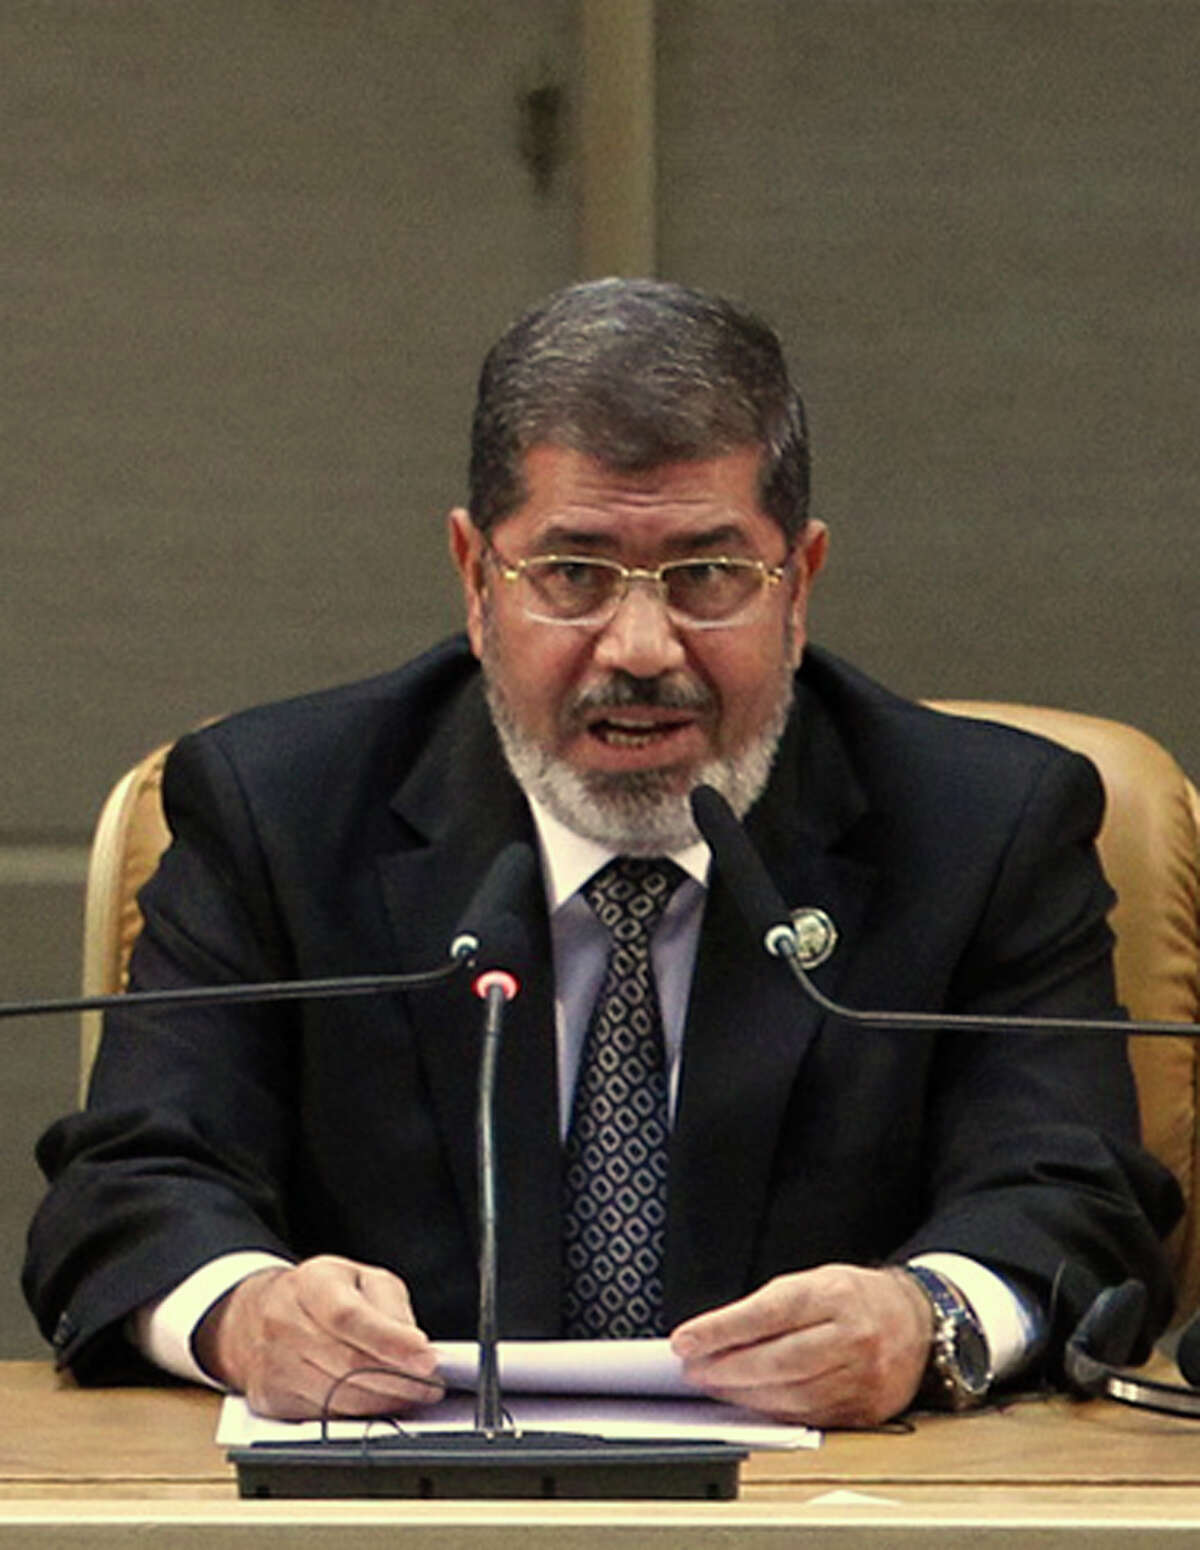 Egyptian leader Mohammed Morsi’s criticism of Iran’s main regional ally, Syria, was awkward for the host country.